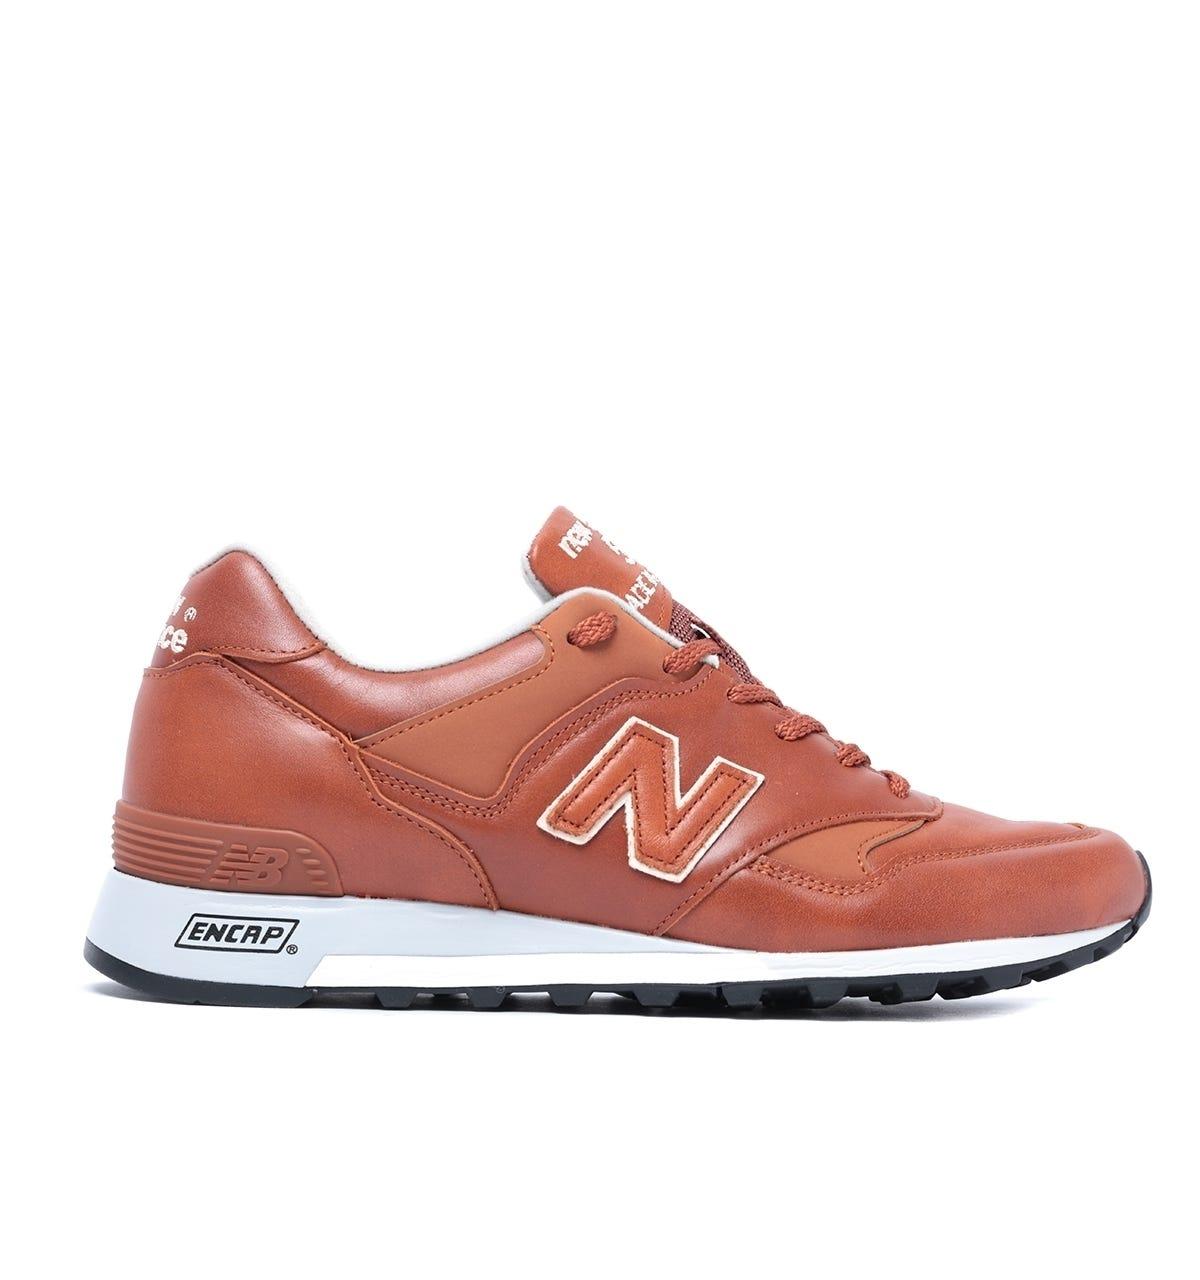 New Balance Made In England M577 Tan Leather Trainers for Men - Lyst